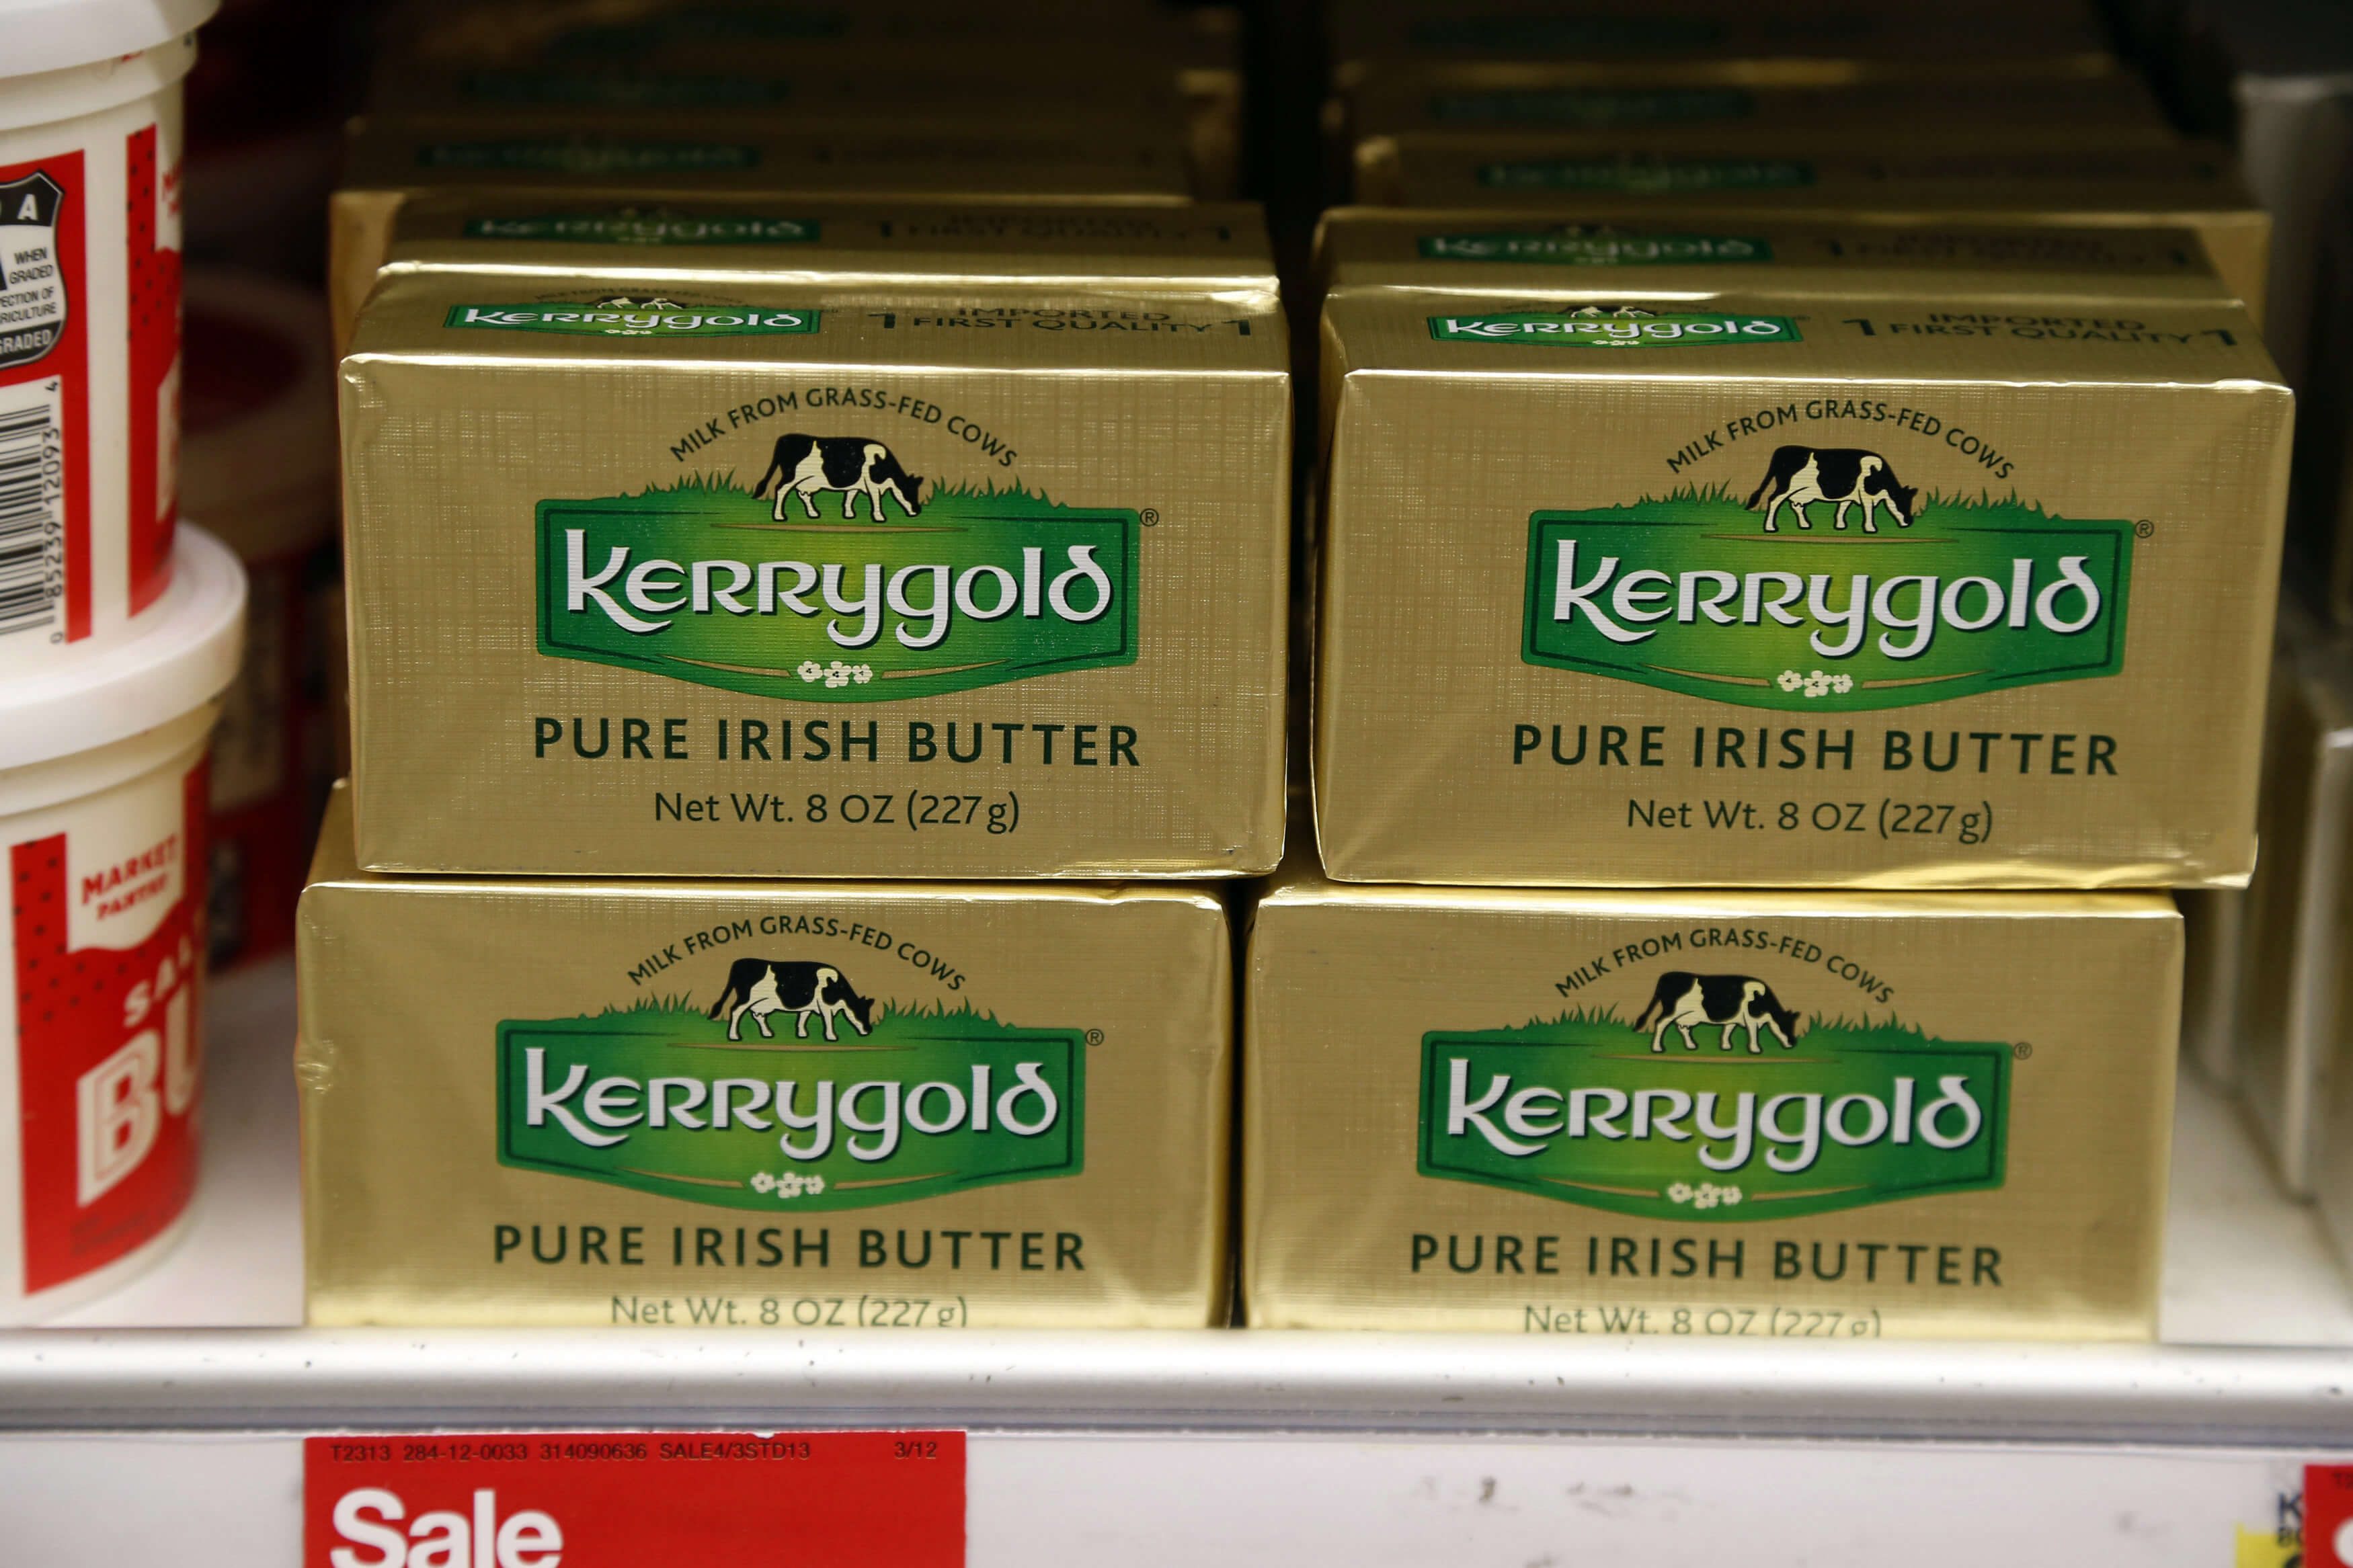 What Makes Kerrygold Butter Different and Why Does It Taste SO Good?